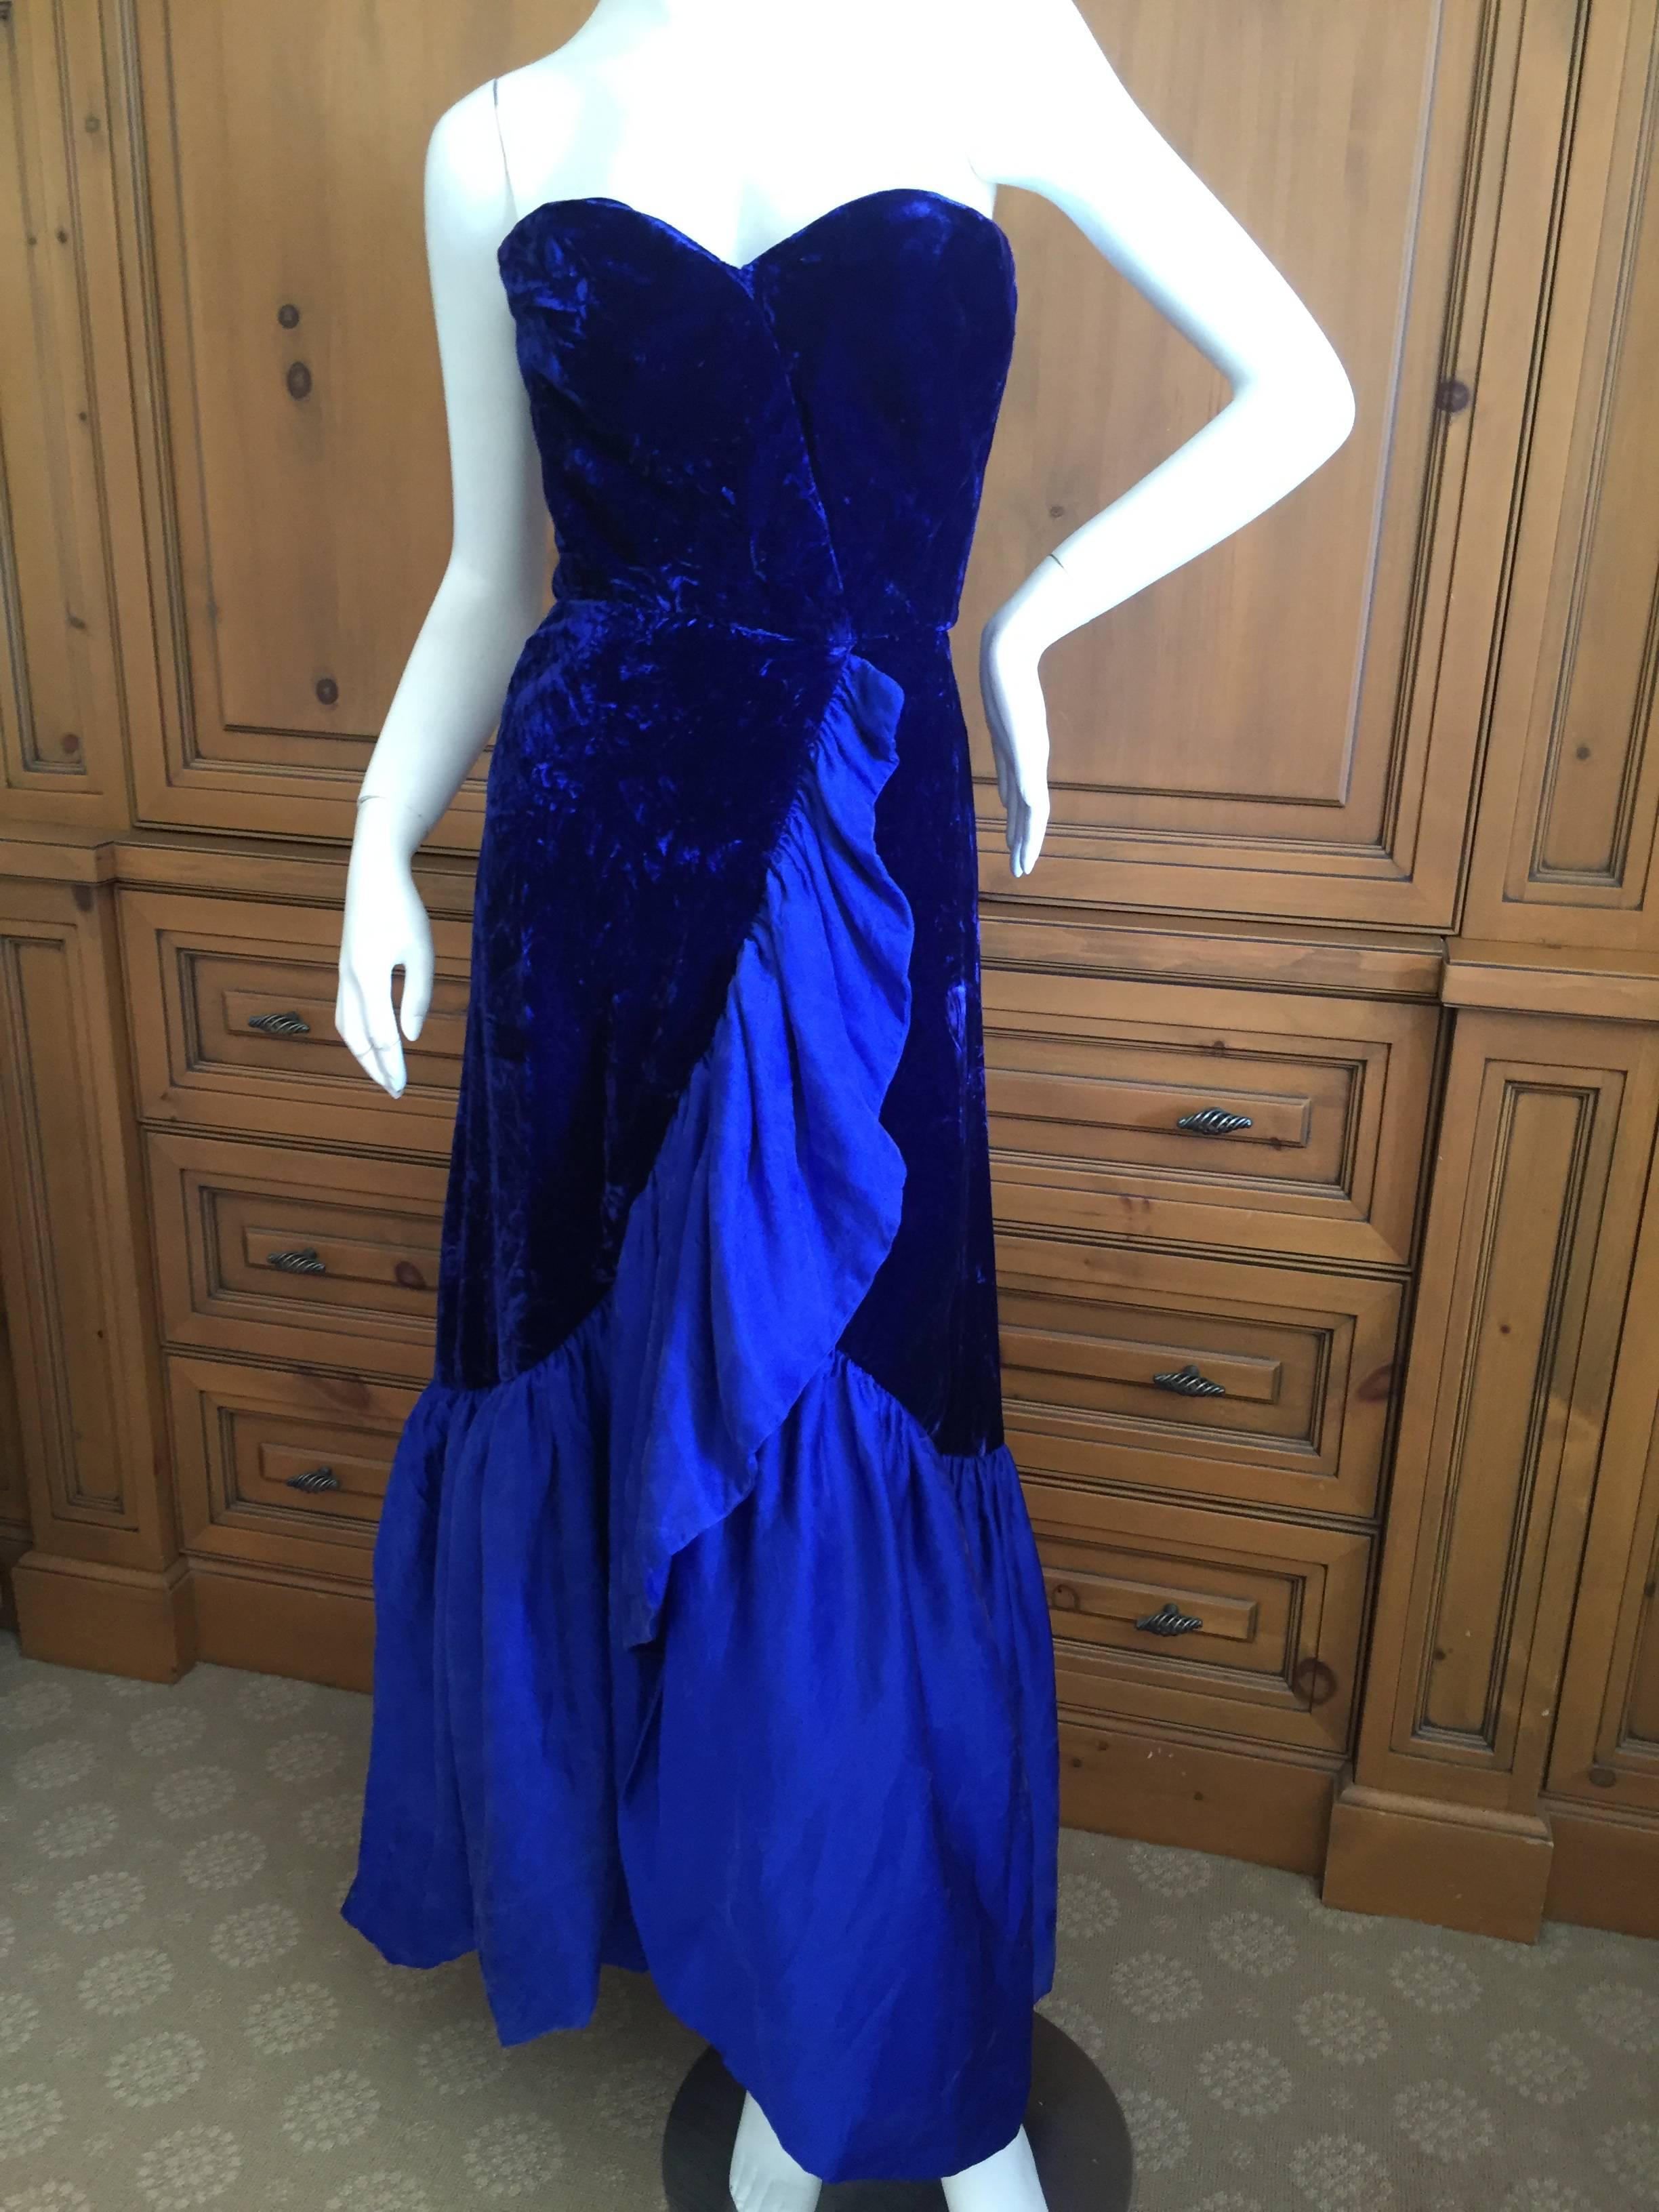 Scaasi Bergdorf Goodman Blue Velvet Evening Gown In Good Condition For Sale In Cloverdale, CA